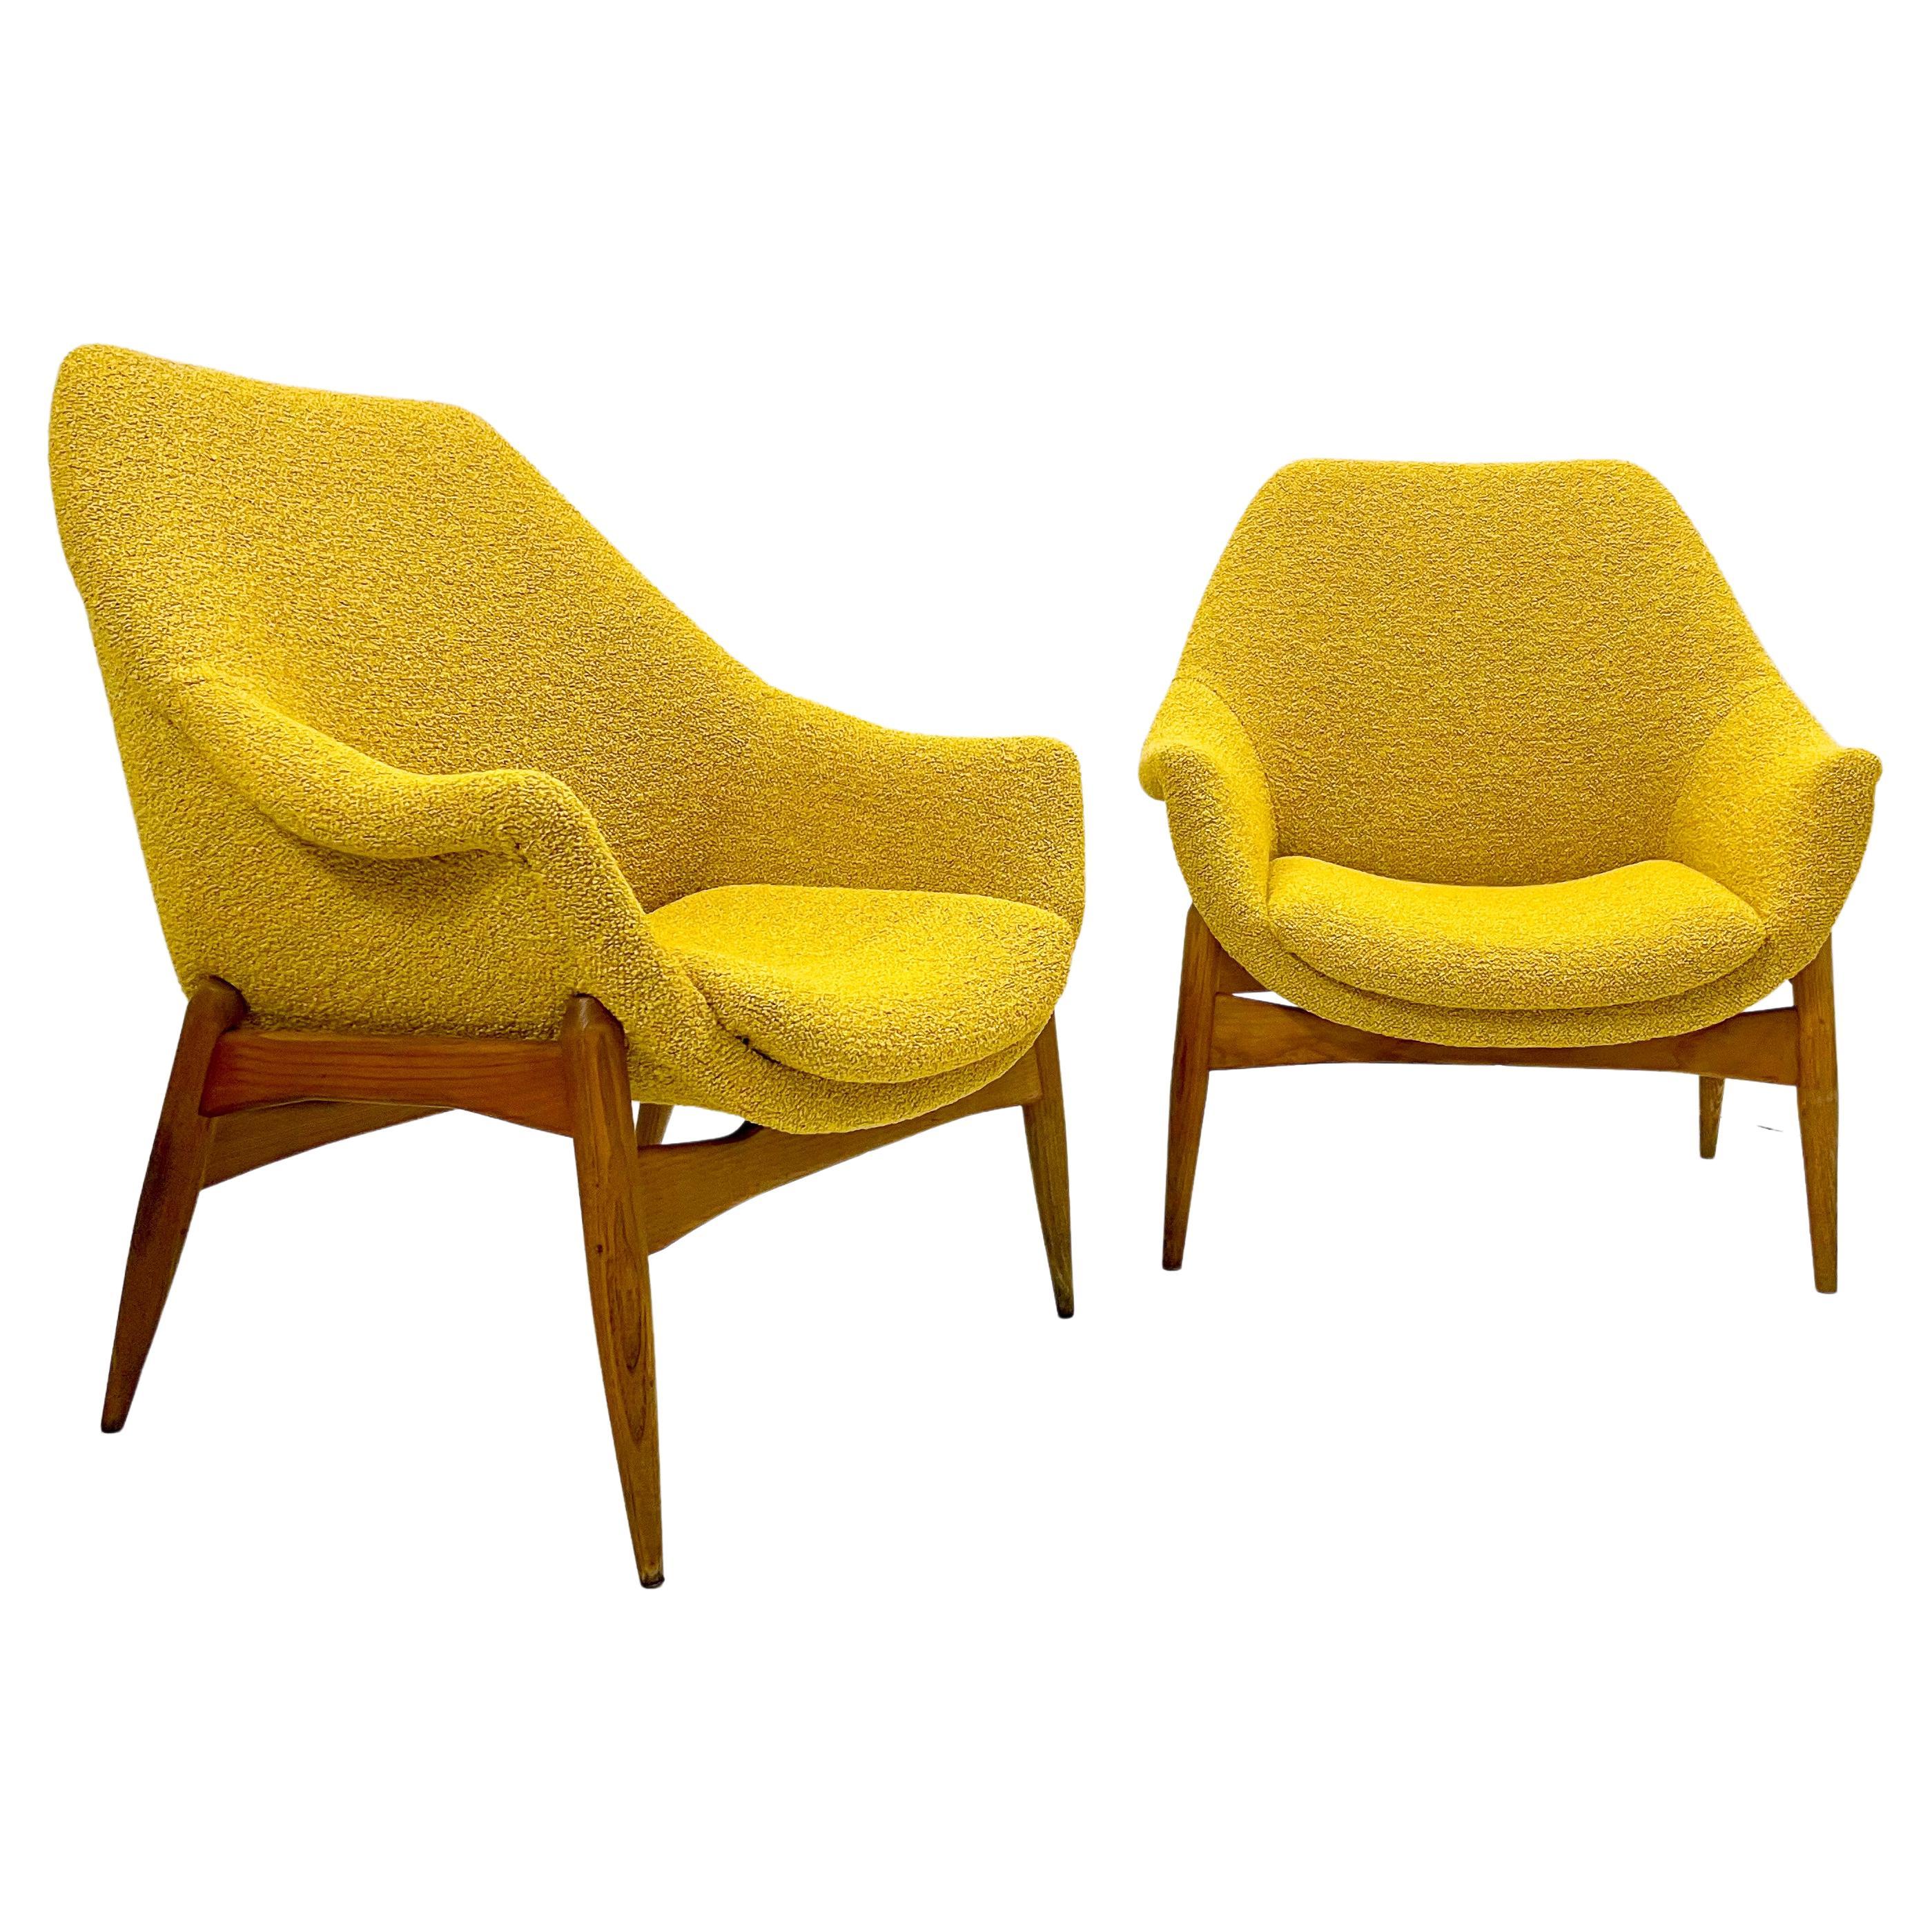 Mid-Century Pair of Yellow Fabric Armchairs by Julia Gaubek, Hungary, 1950s For Sale